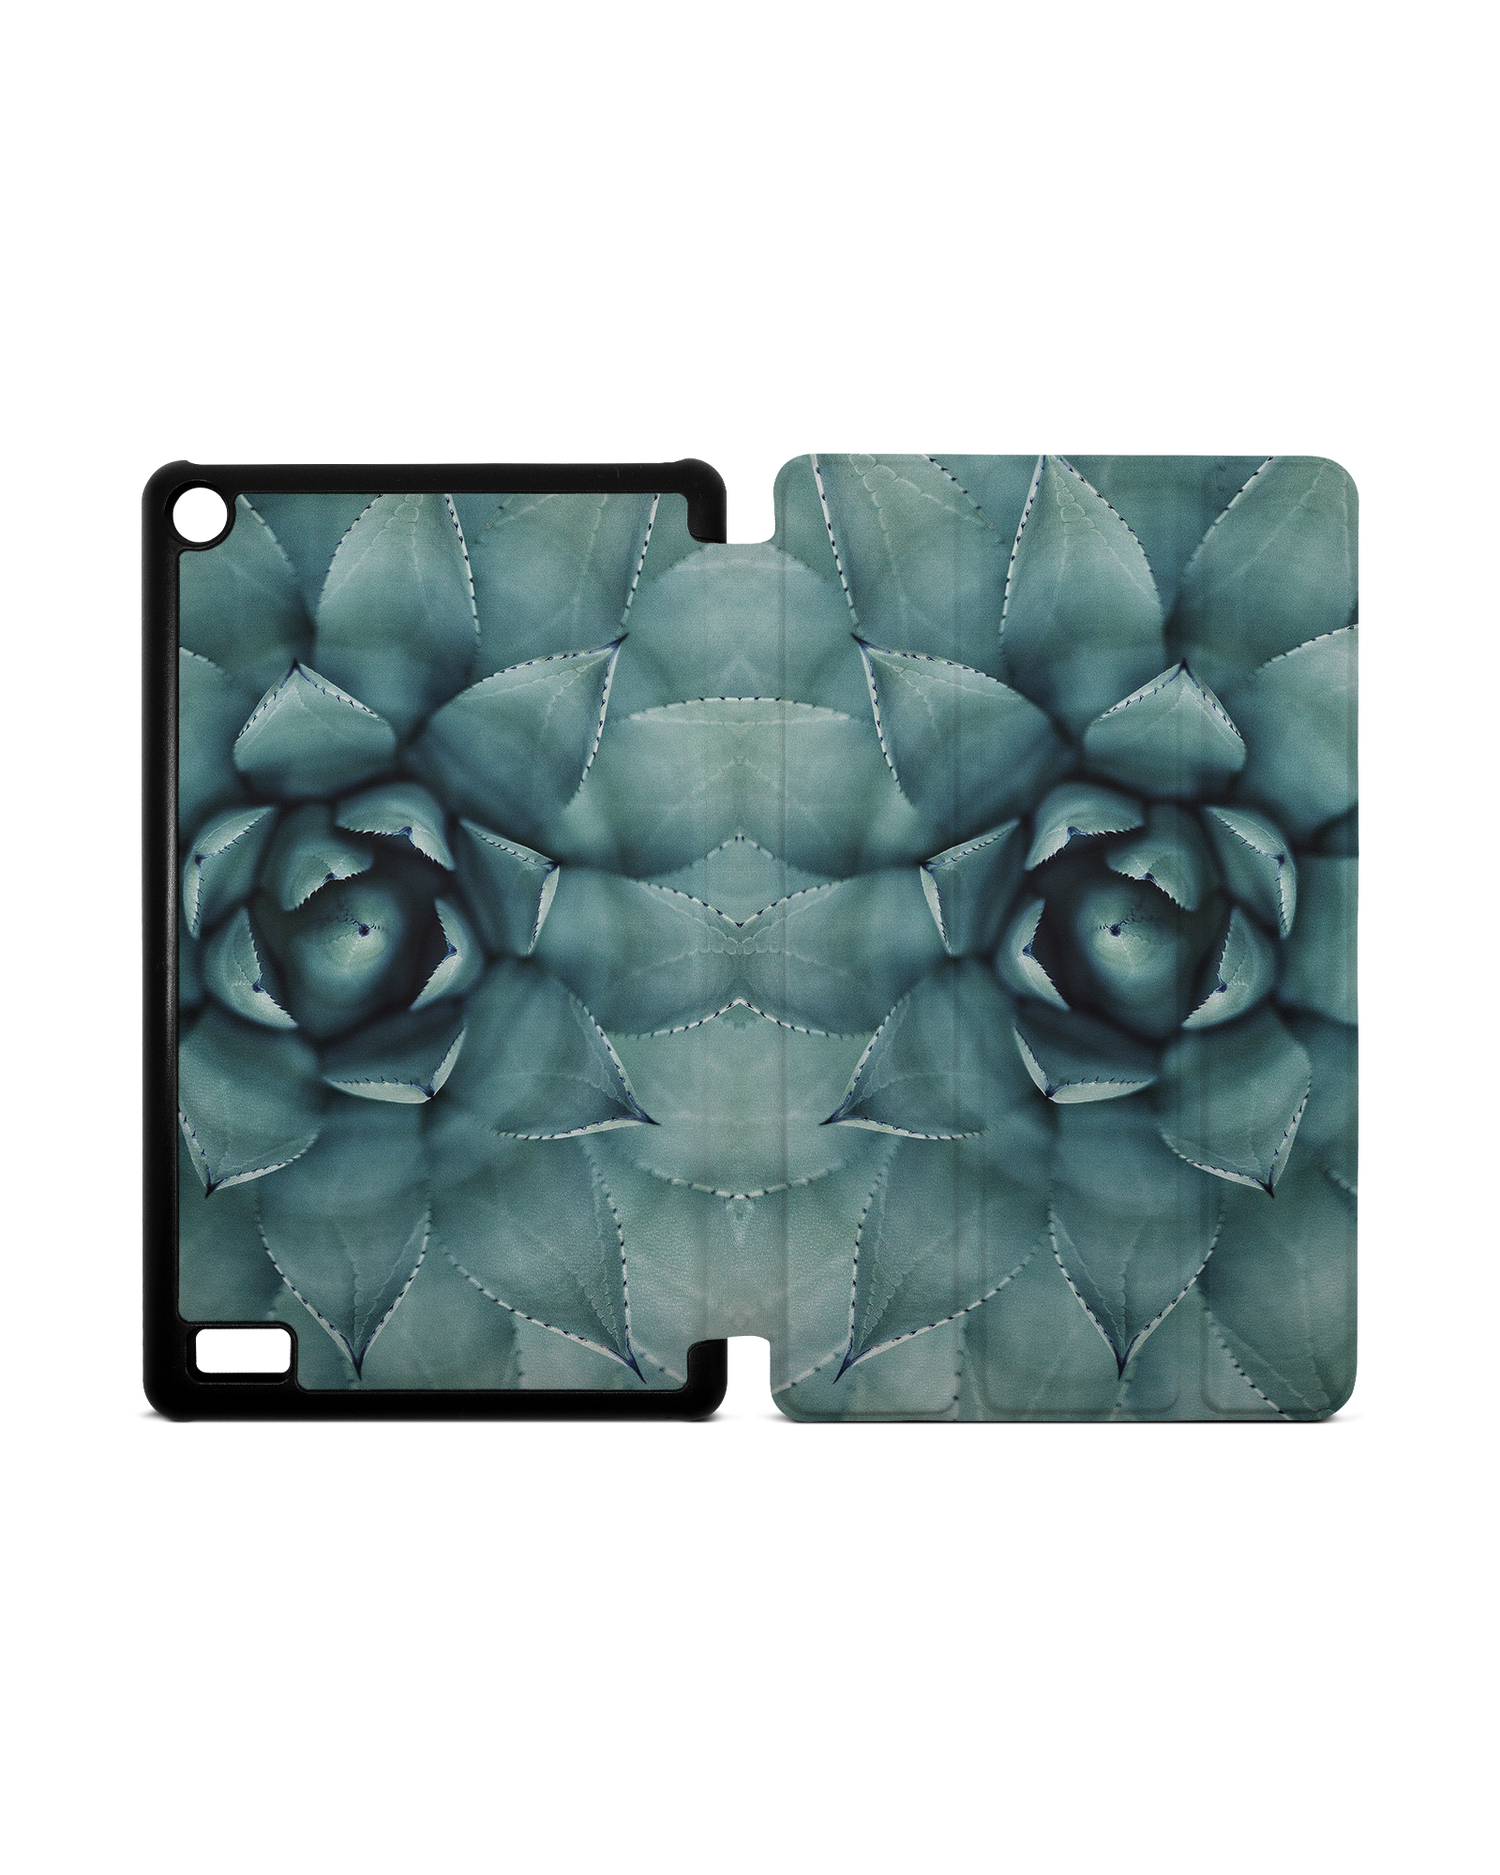 Beautiful Succulent Tablet Smart Case for Amazon Fire 7: Opened